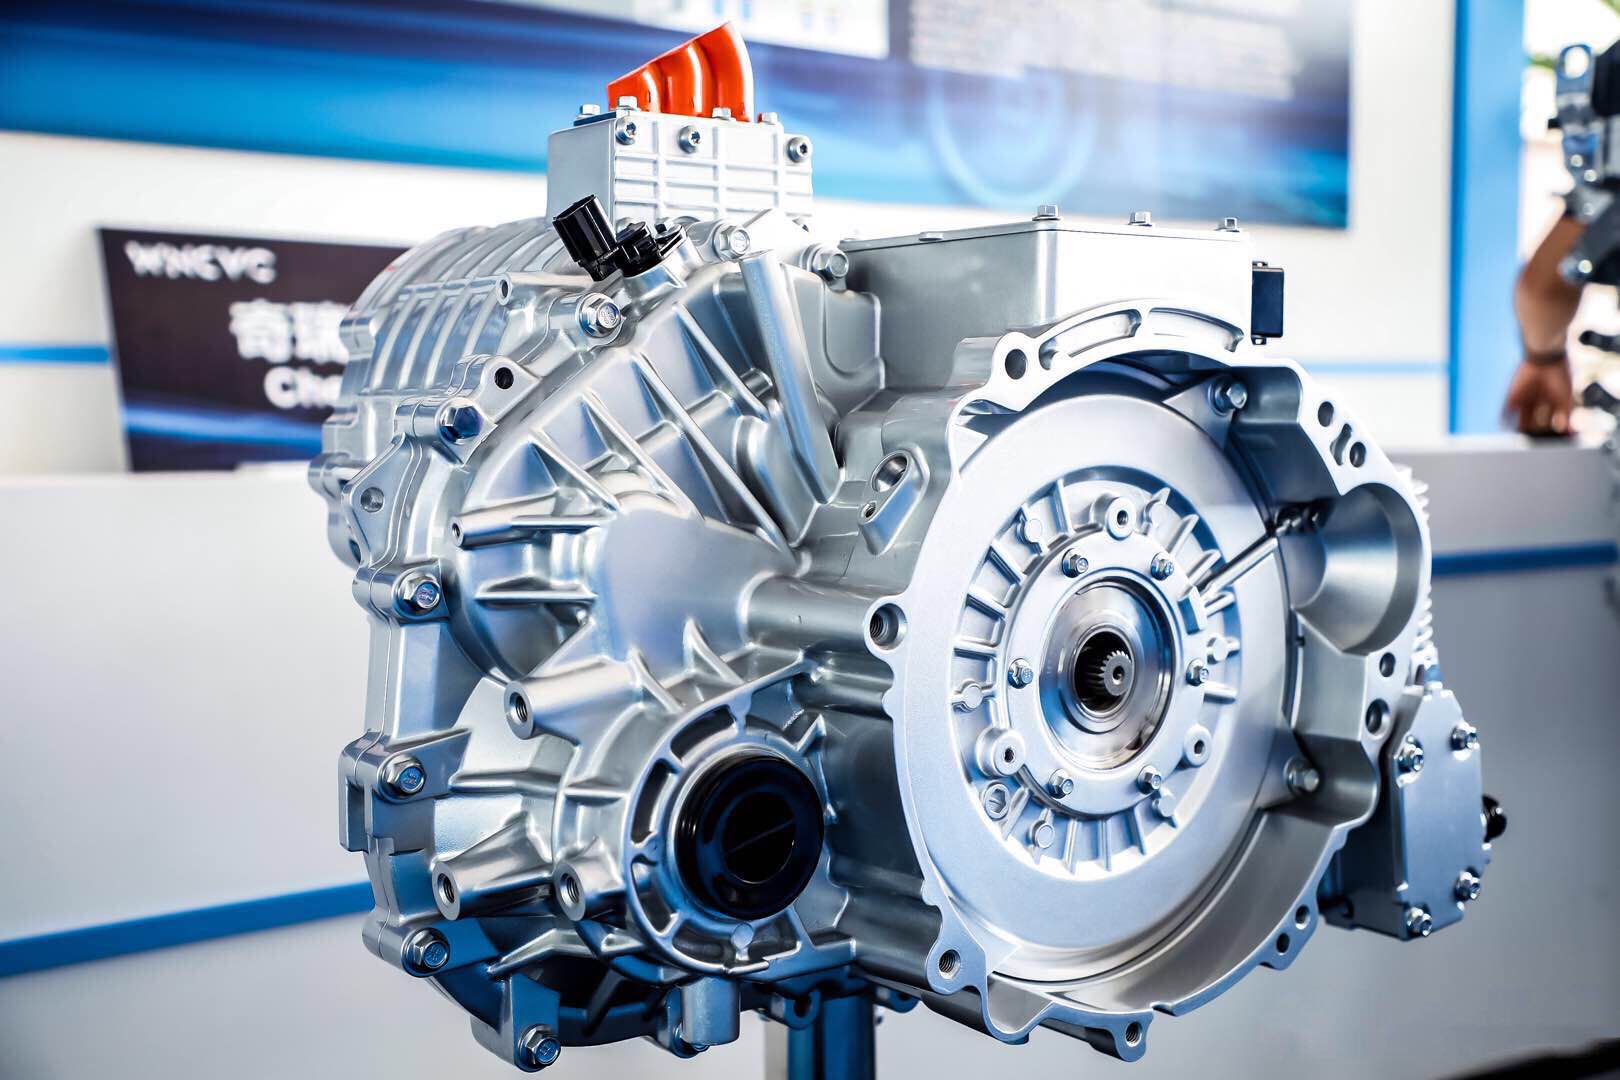 Chery's hybrid engine with a thermal efficiency of 41% is at the leading level in the world